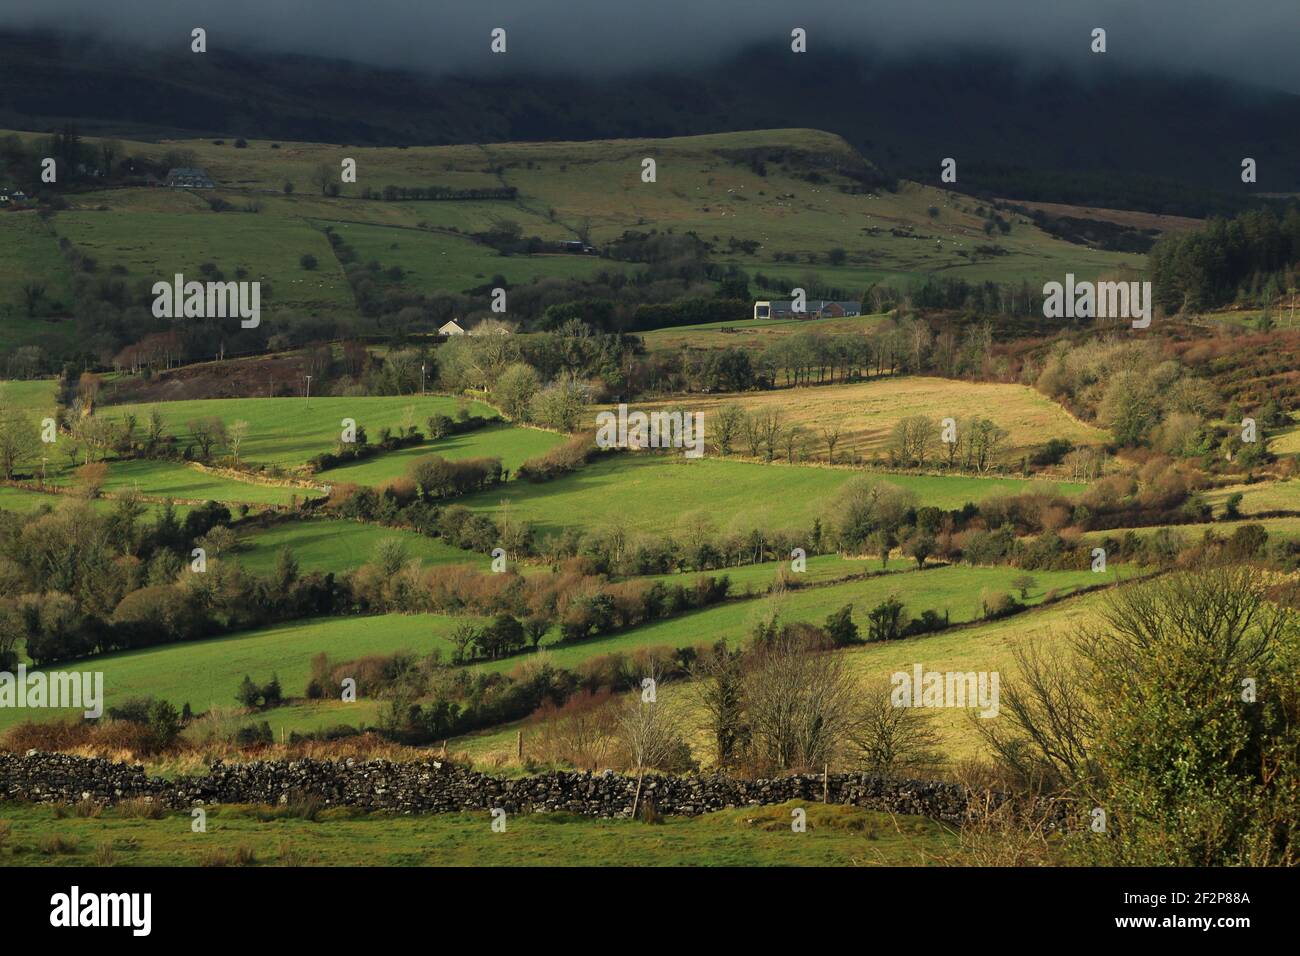 Landscape at Calry, County Sligo, Ireland featuring hills of green fields farmland bordered by trees and stone walls under overcast skies Stock Photo